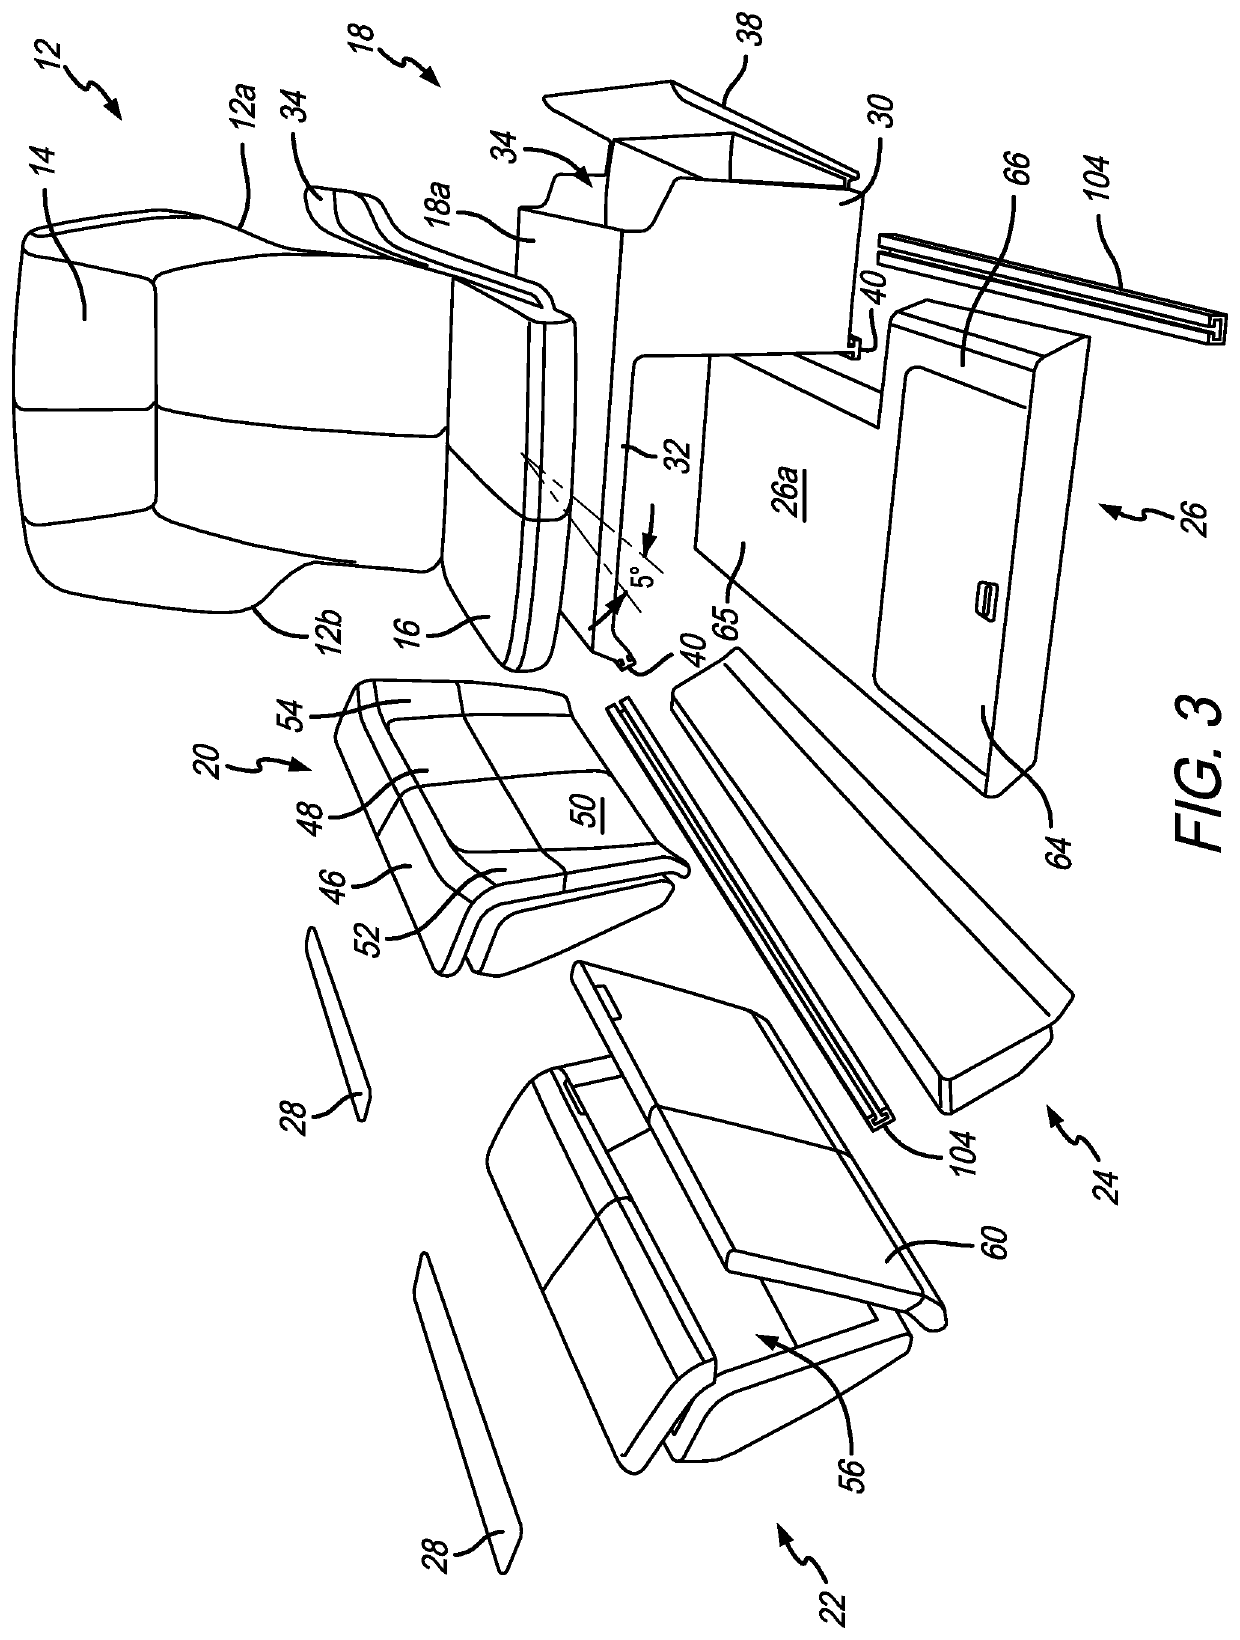 Vehicle business class seat and stowage system